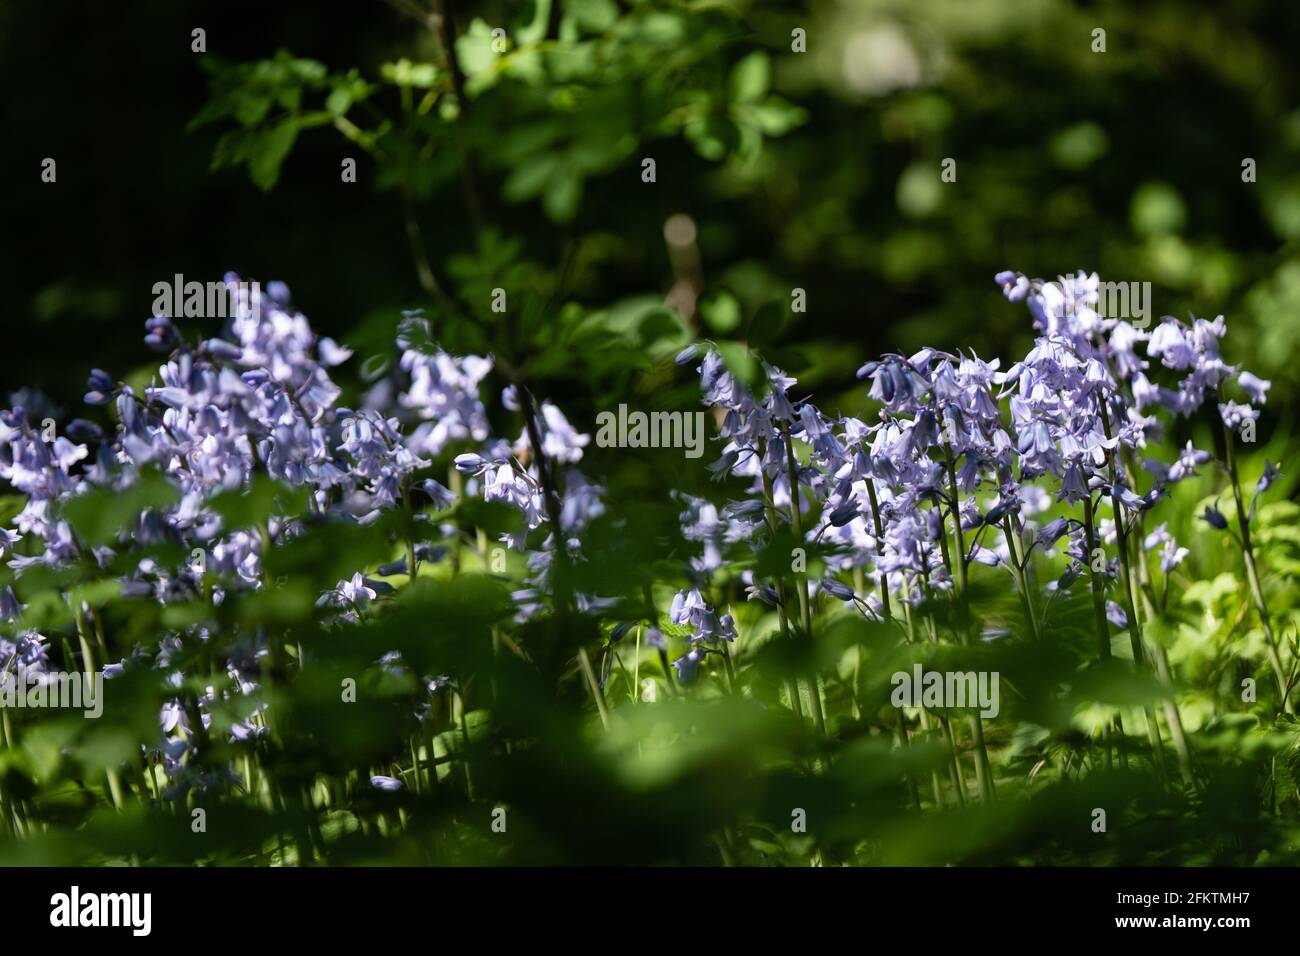 Lyon (France), April 27, 2021. Spring flowers called bluebells or campanula scilla. Stock Photo